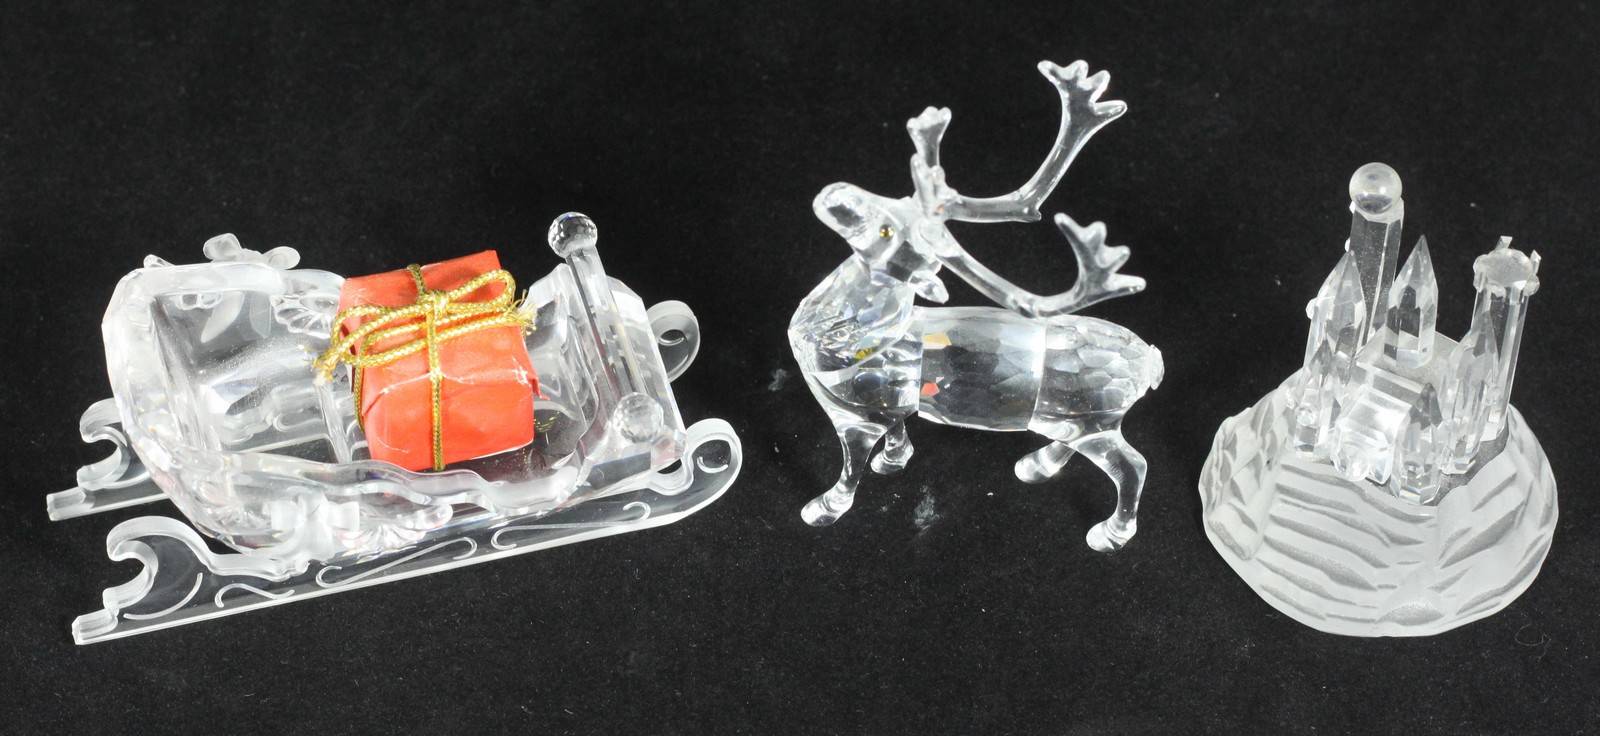 A Swarovski crystal model of a reindeer and sleigh with present, together with a Swarovski crystal - Image 2 of 2